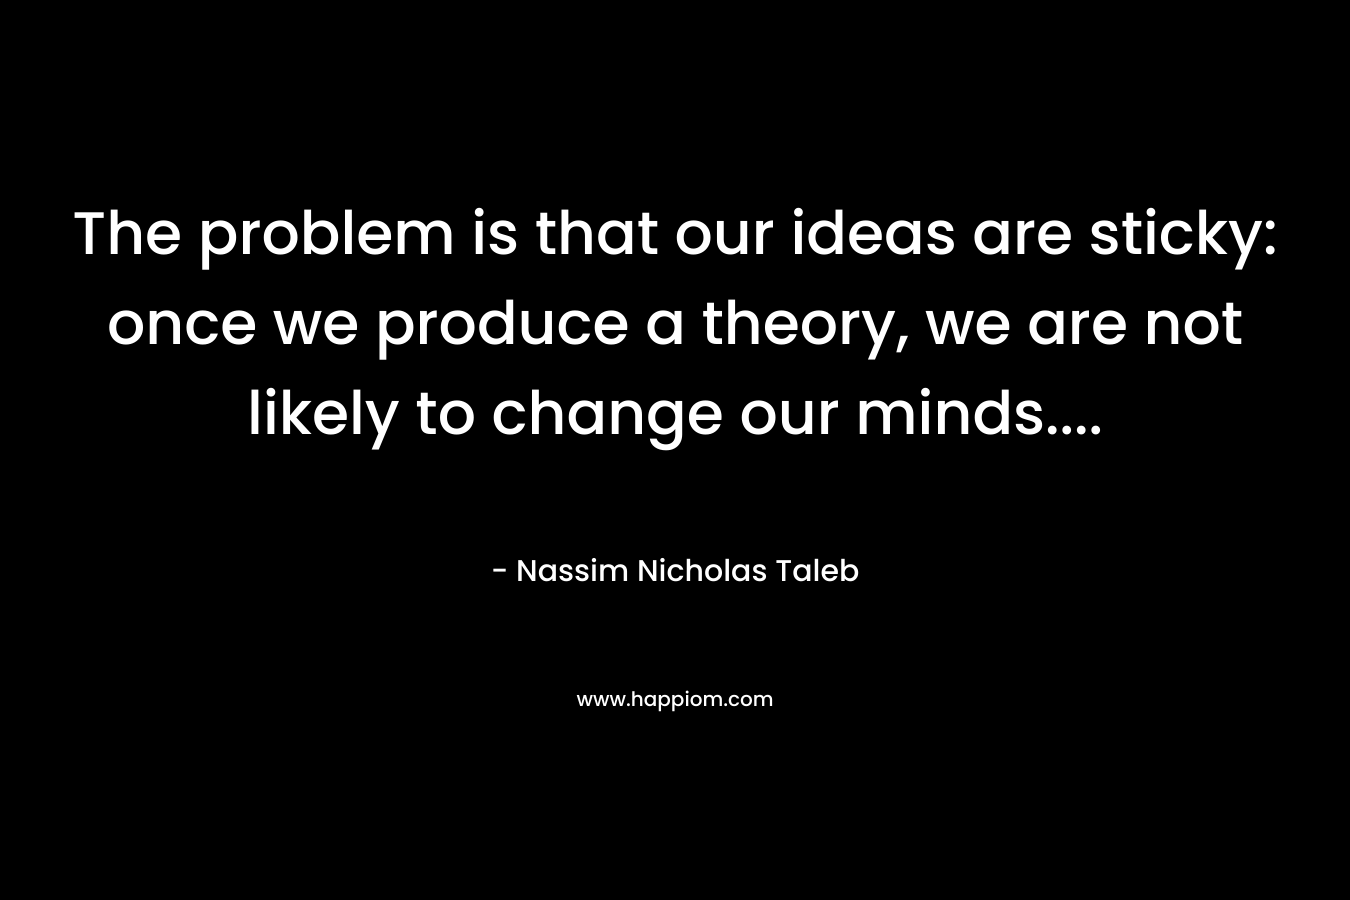 The problem is that our ideas are sticky: once we produce a theory, we are not likely to change our minds…. – Nassim Nicholas Taleb